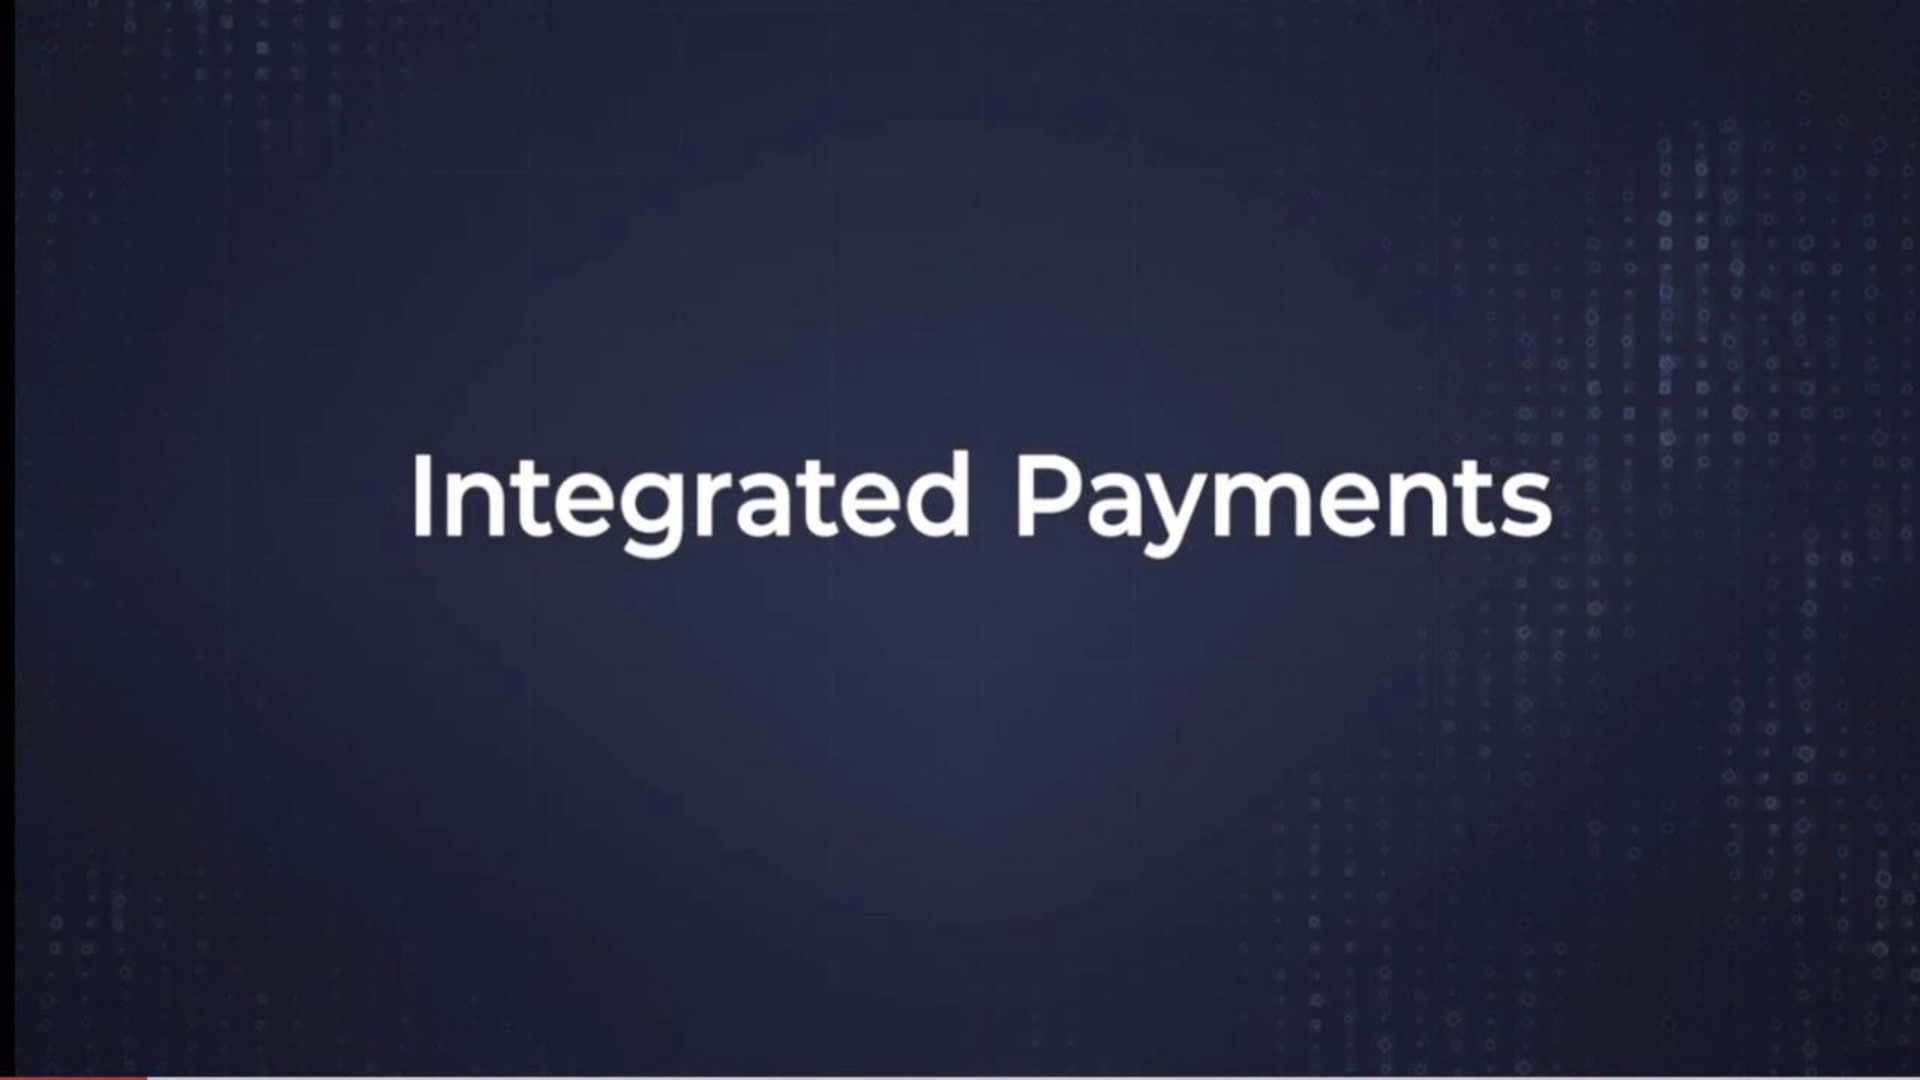 integrated payments | Shift4